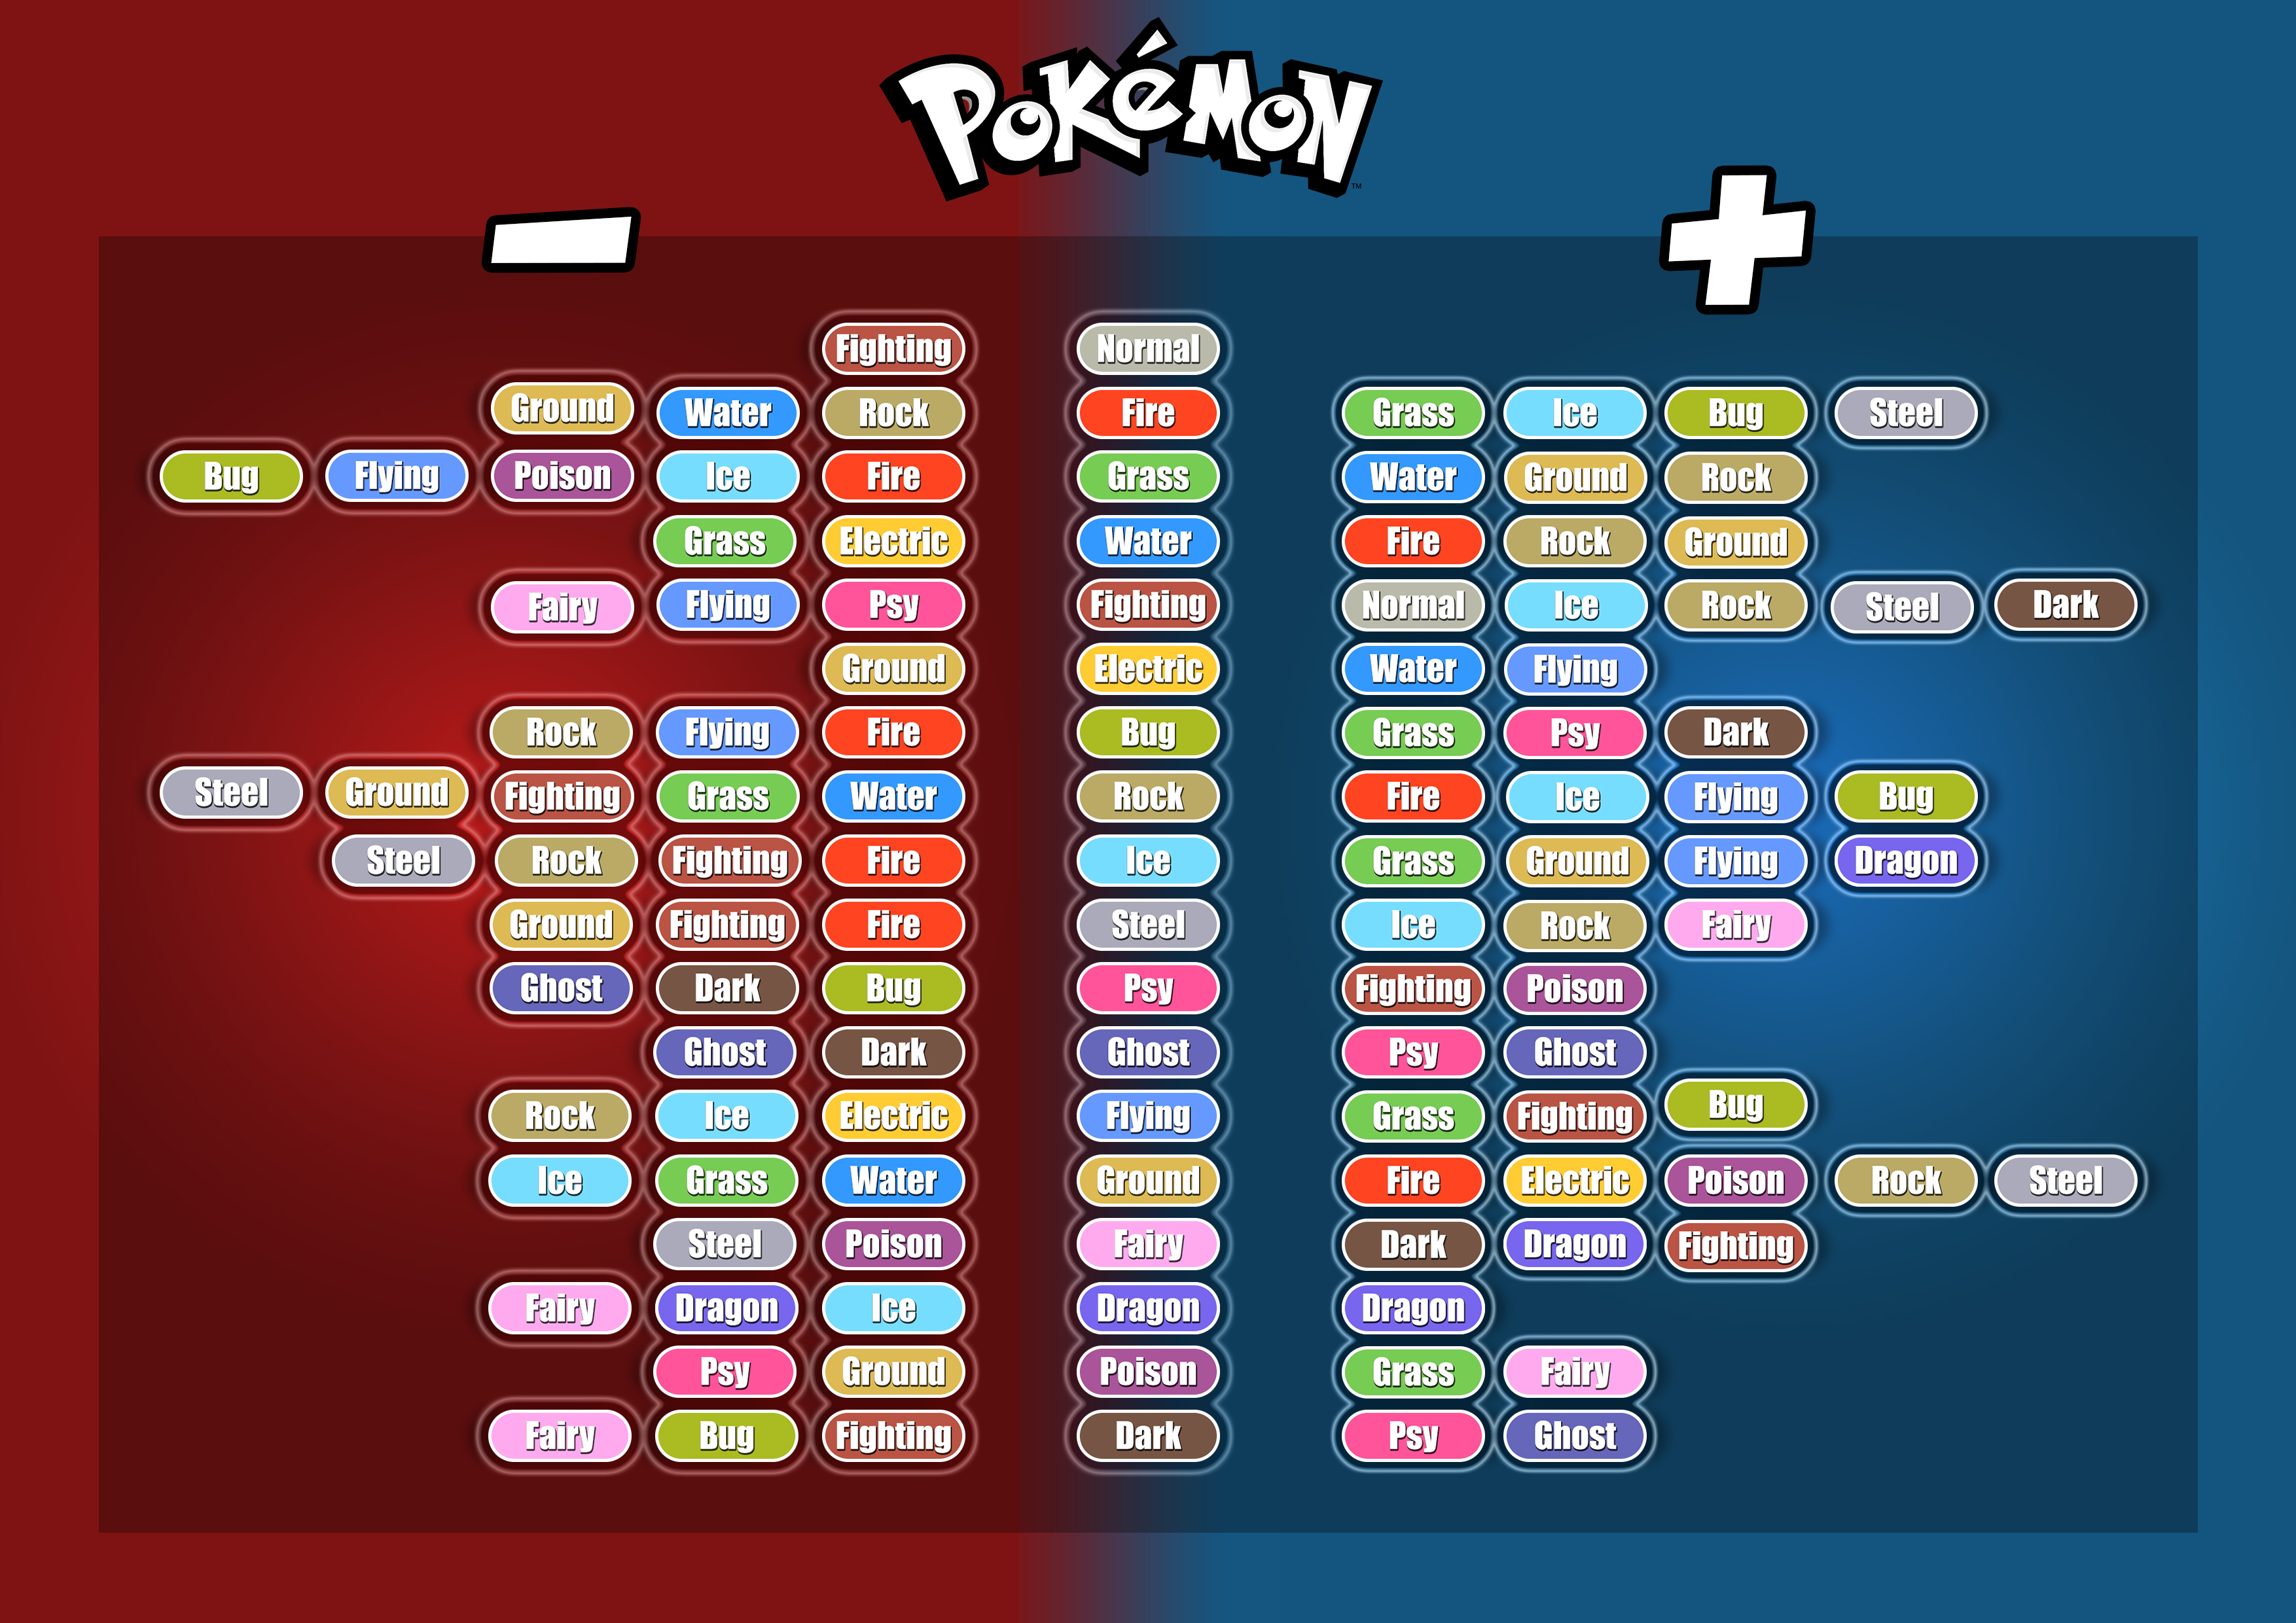 Pokémon Type Chart: All Type Strengths & Weaknesses